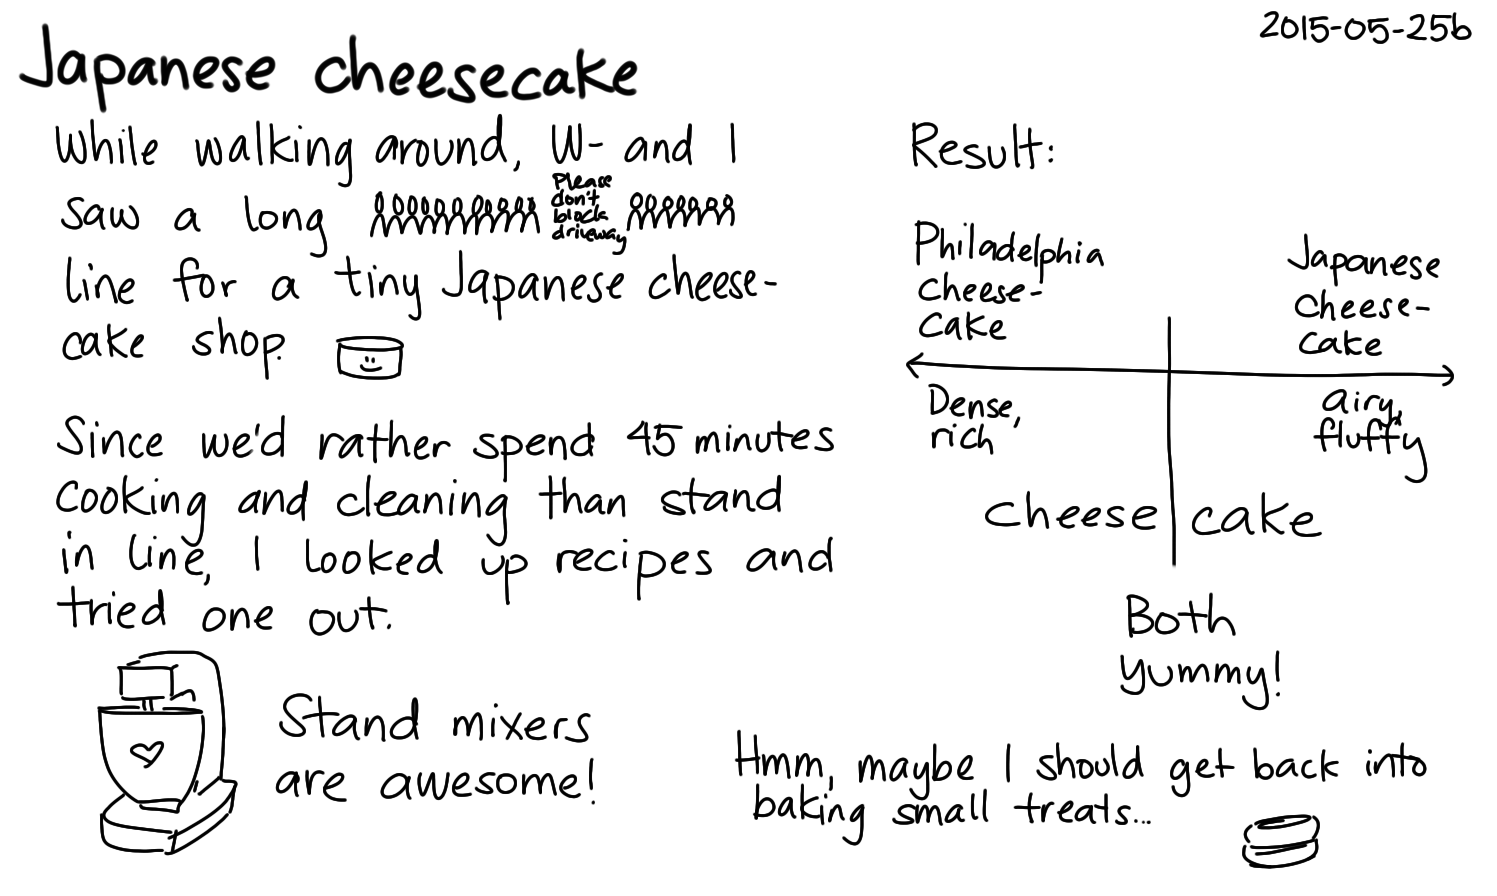 2015-05-25b Japanese cheesecake -- index card #cooking.png